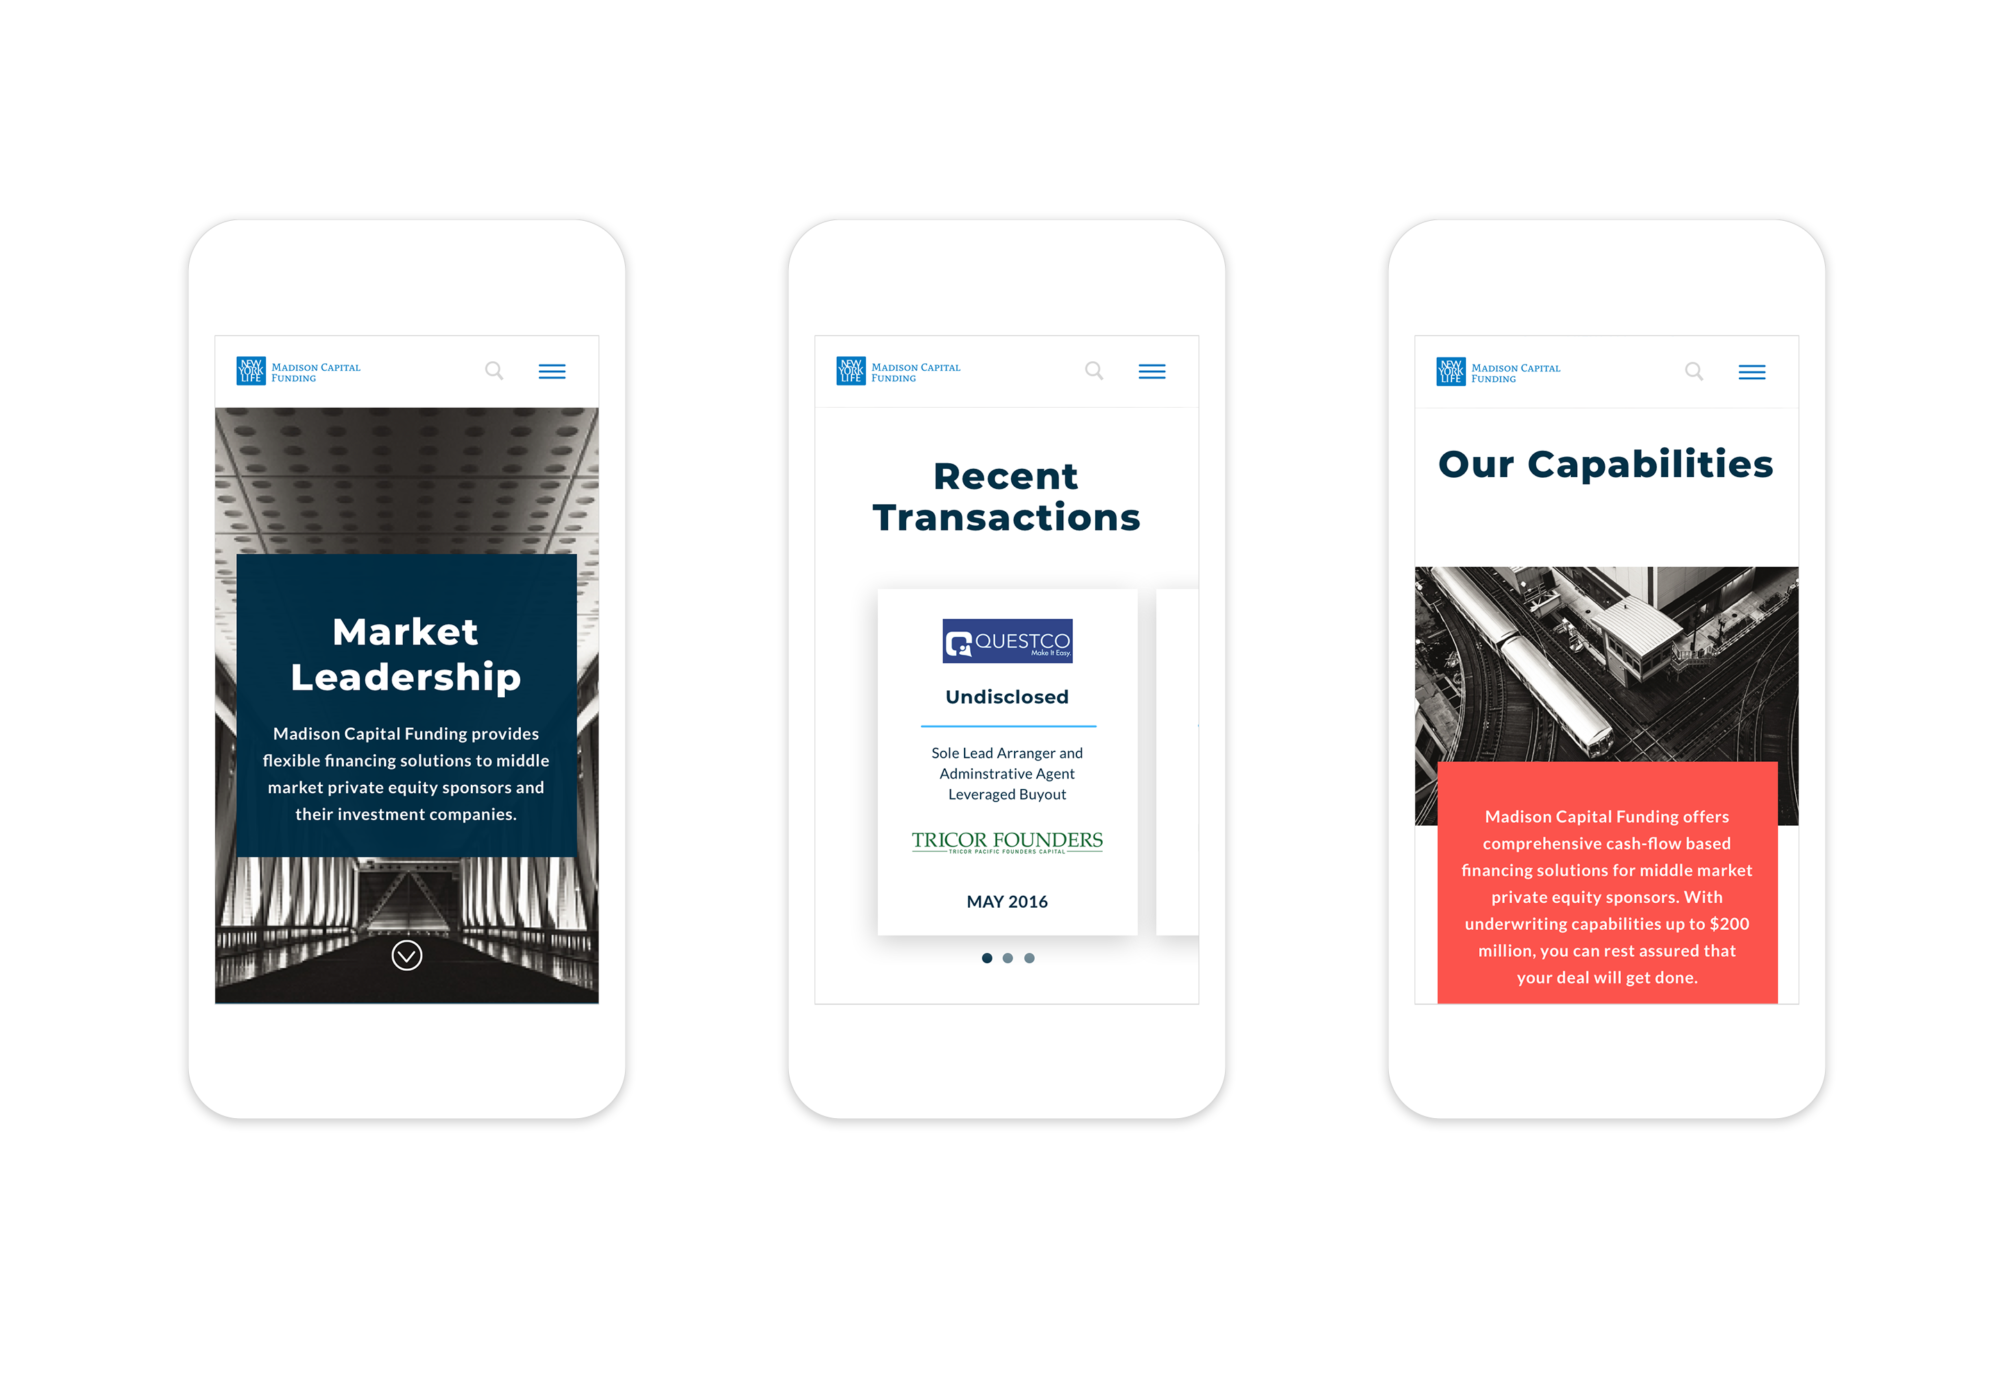 3 responsive mobile webpages: Homepage, Transactions page, and Capabilities page